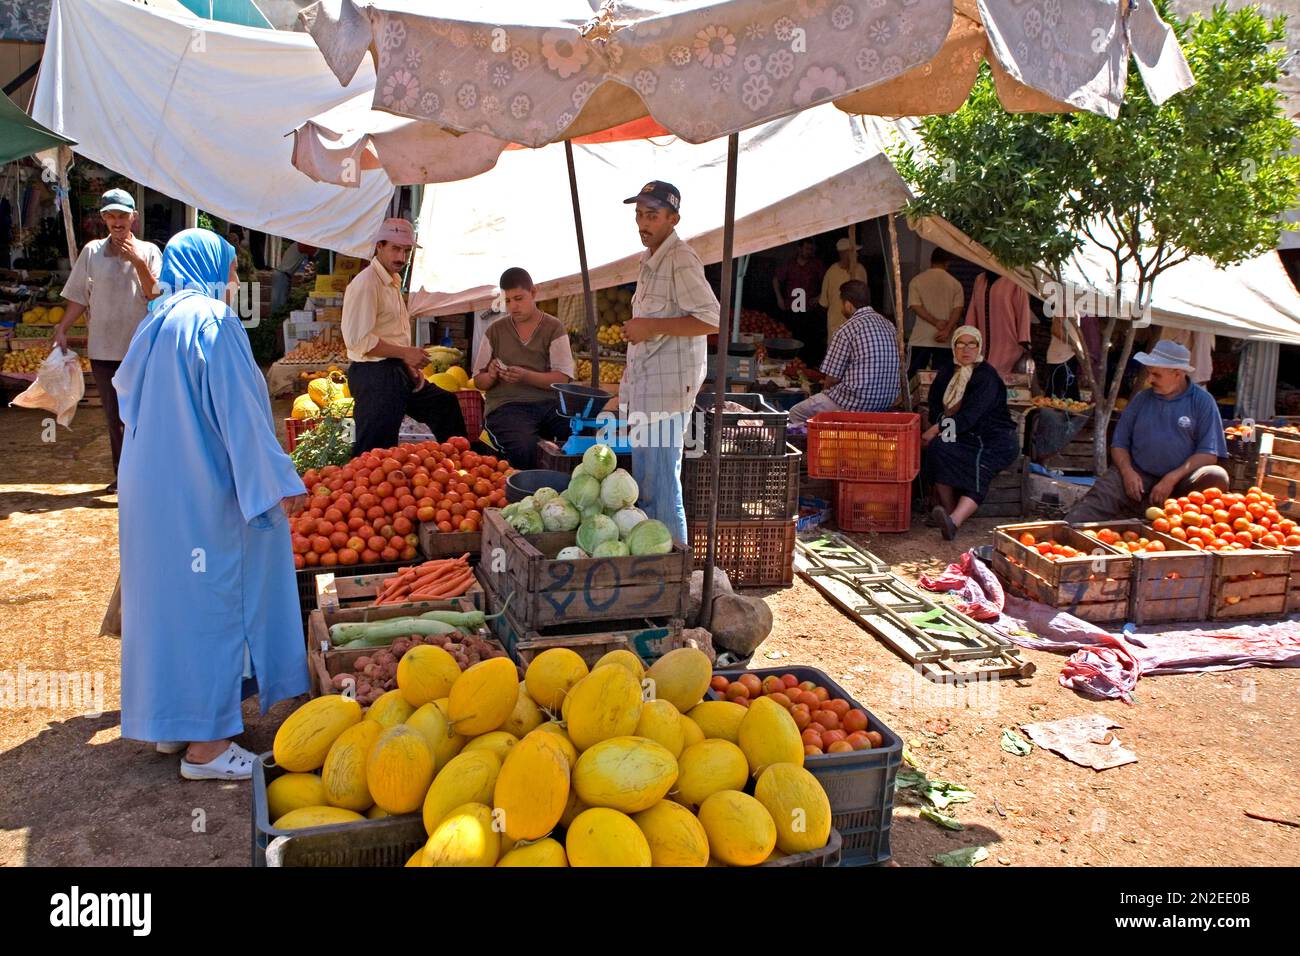 Trading at the vegetable market, Marrakech, Morocco, Africa Stock Photo